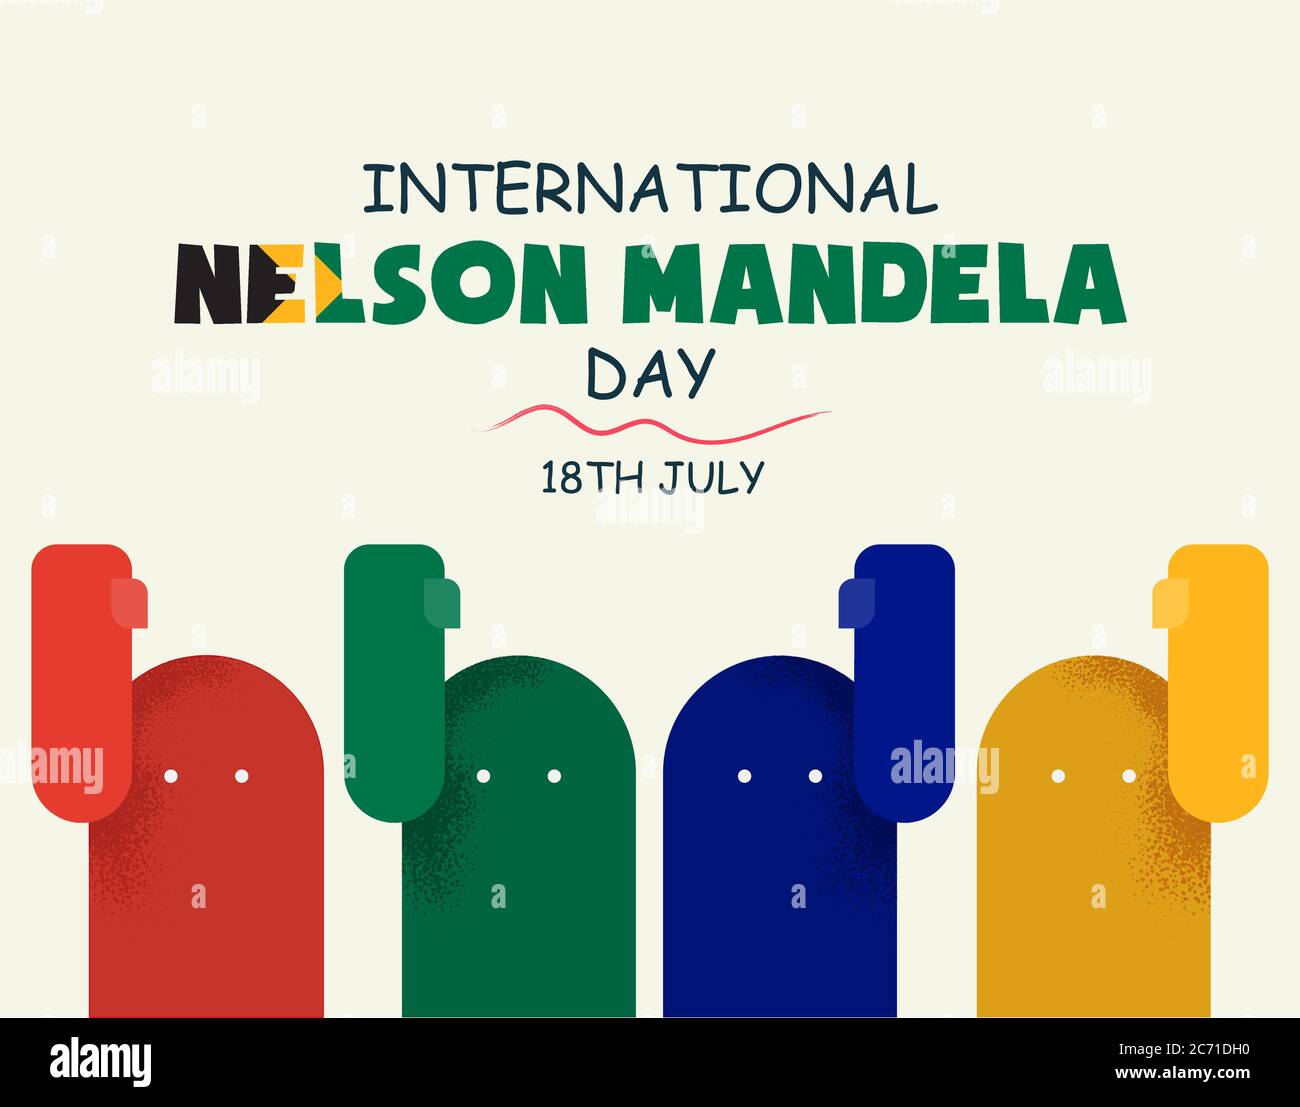 International Nelson Mandela Day, 18th July, abstract African flag color people, poster, illustration vector Stock Vector